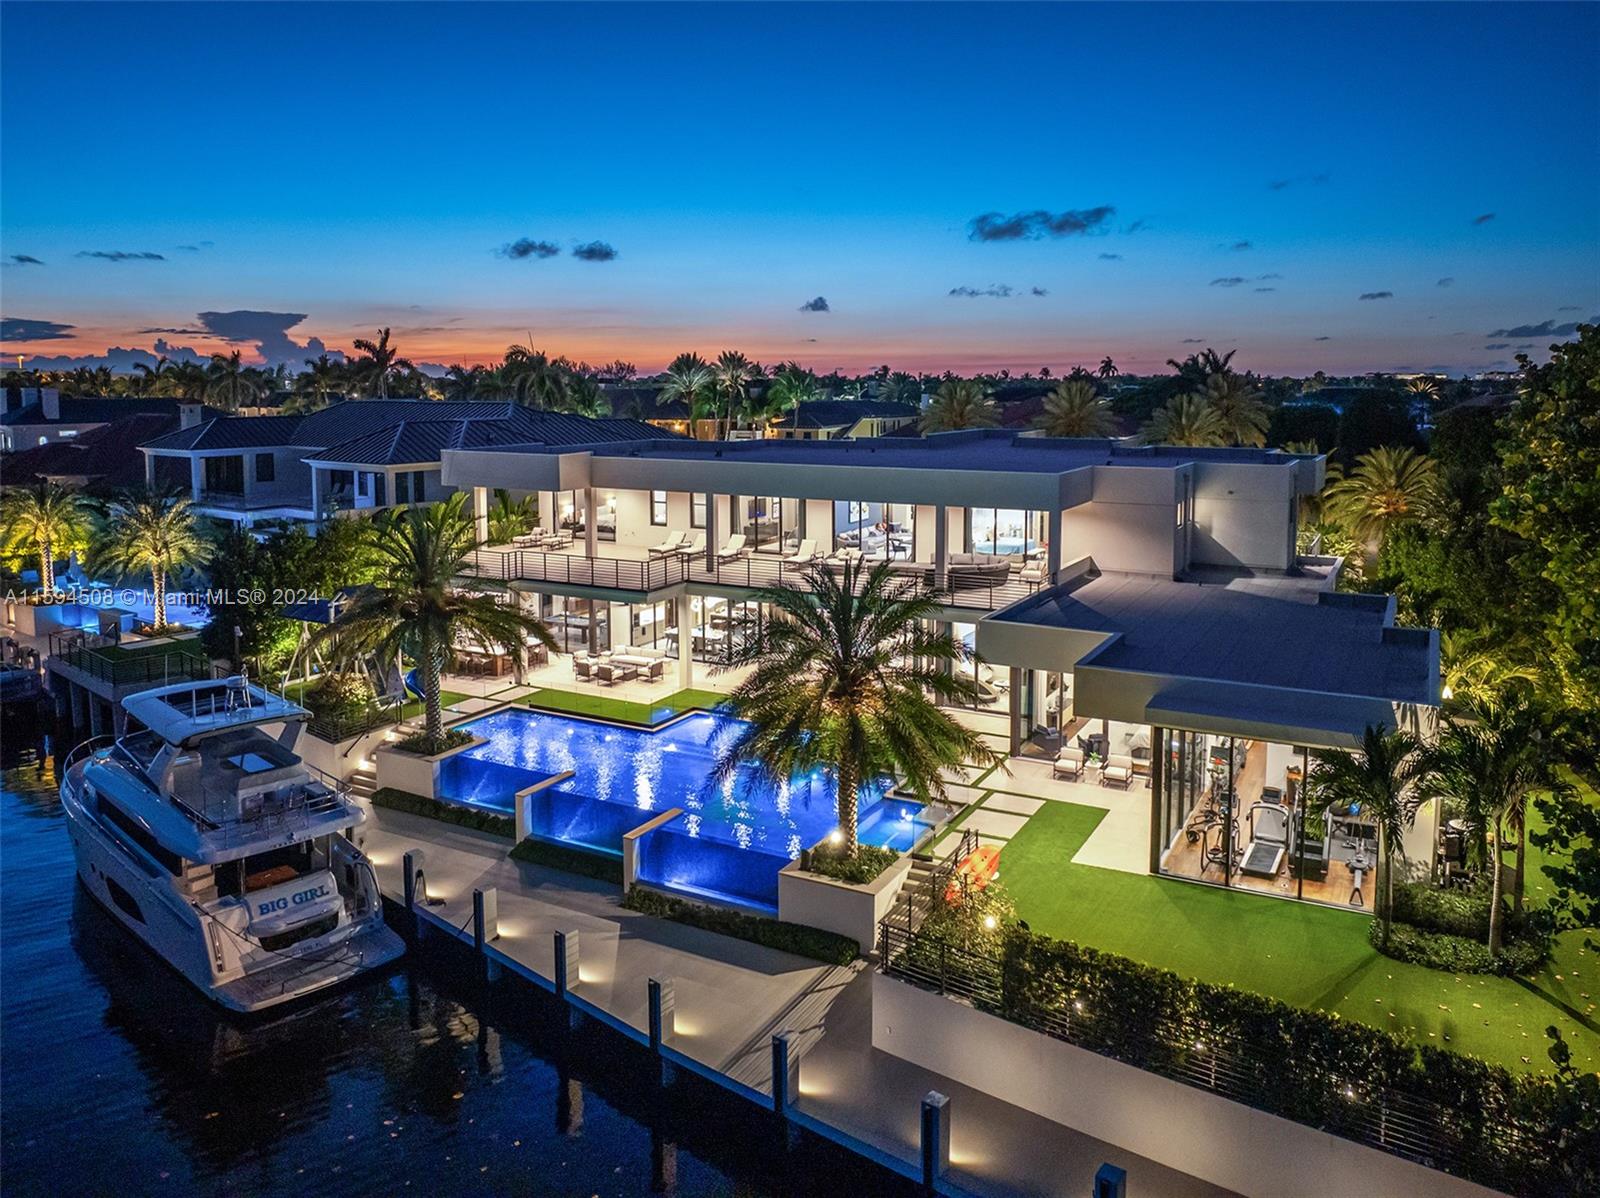 Property for Sale at 298 W Key Palm Rd Rd, Boca Raton, Broward County, Florida - Bedrooms: 6 
Bathrooms: 9.5  - $26,975,000